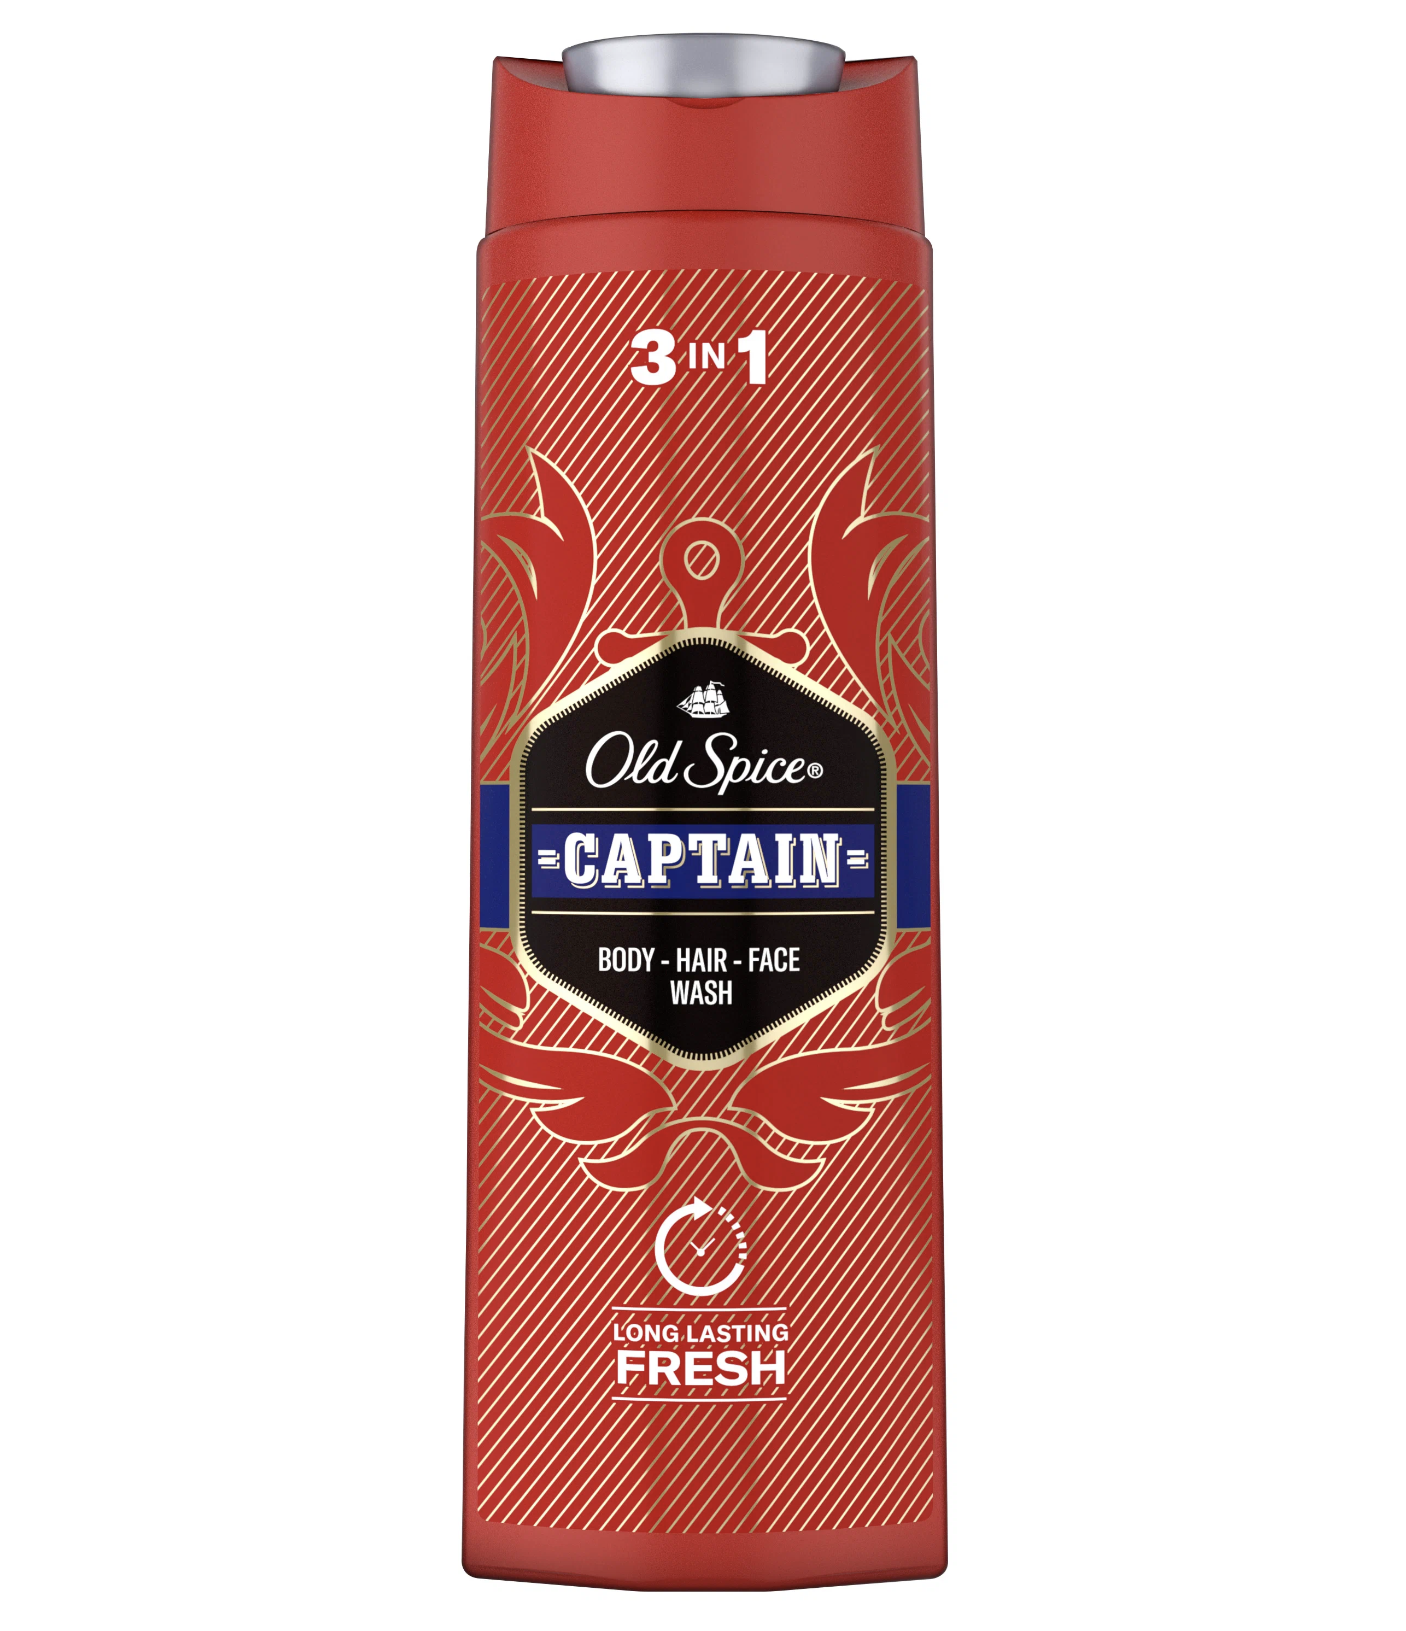    / Old Spice Captain -      31, 400 